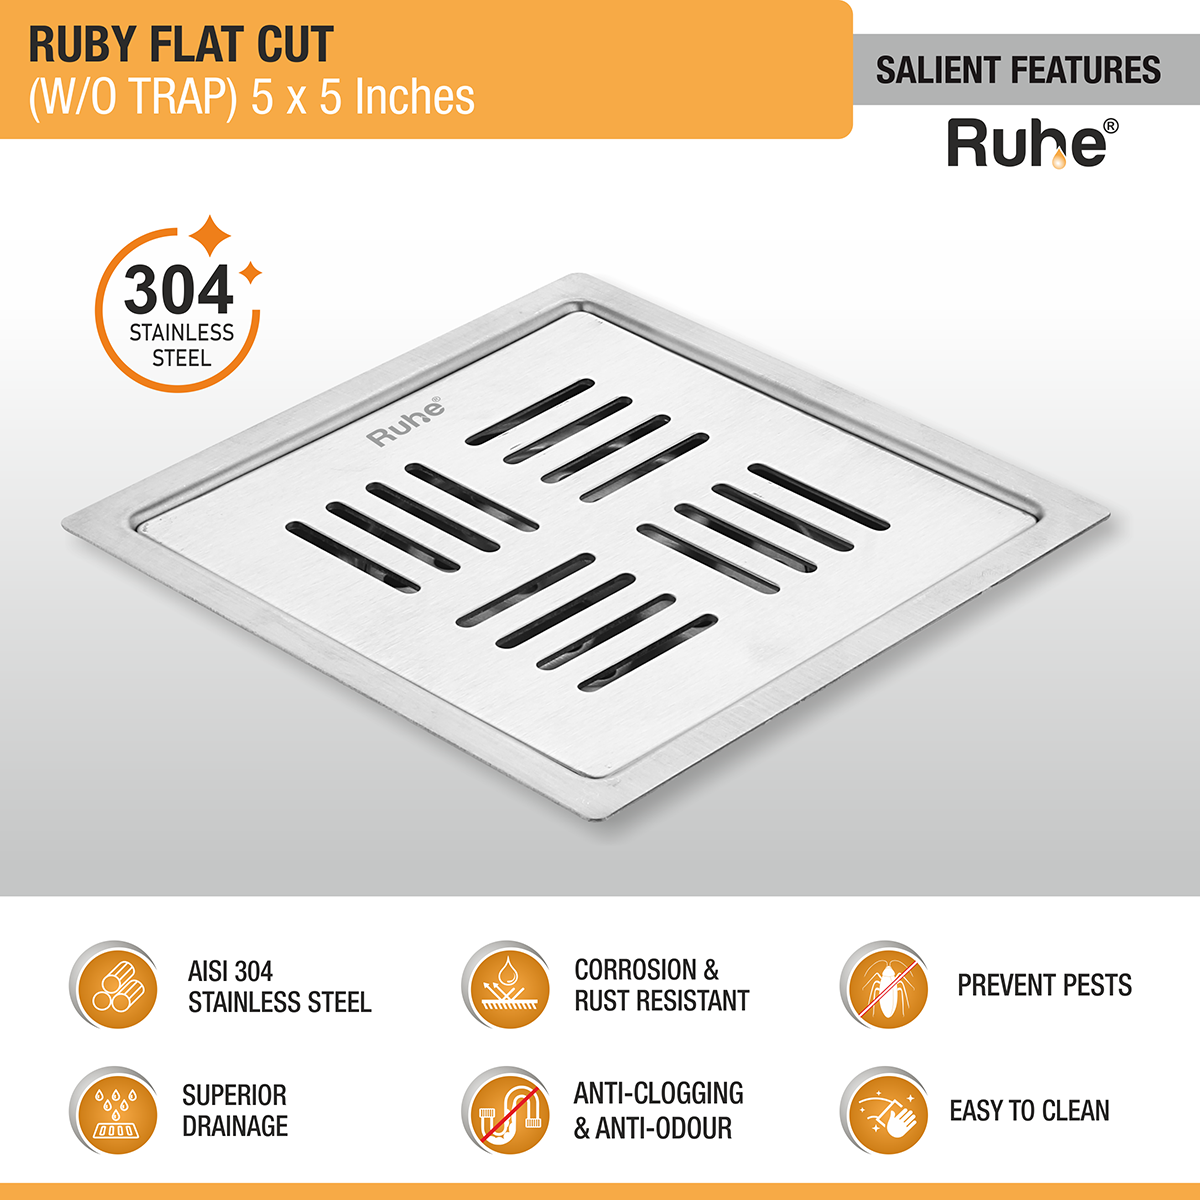 Ruby Square Flat Cut 304-Grade Floor Drain (5 x 5 Inches) features and benefits